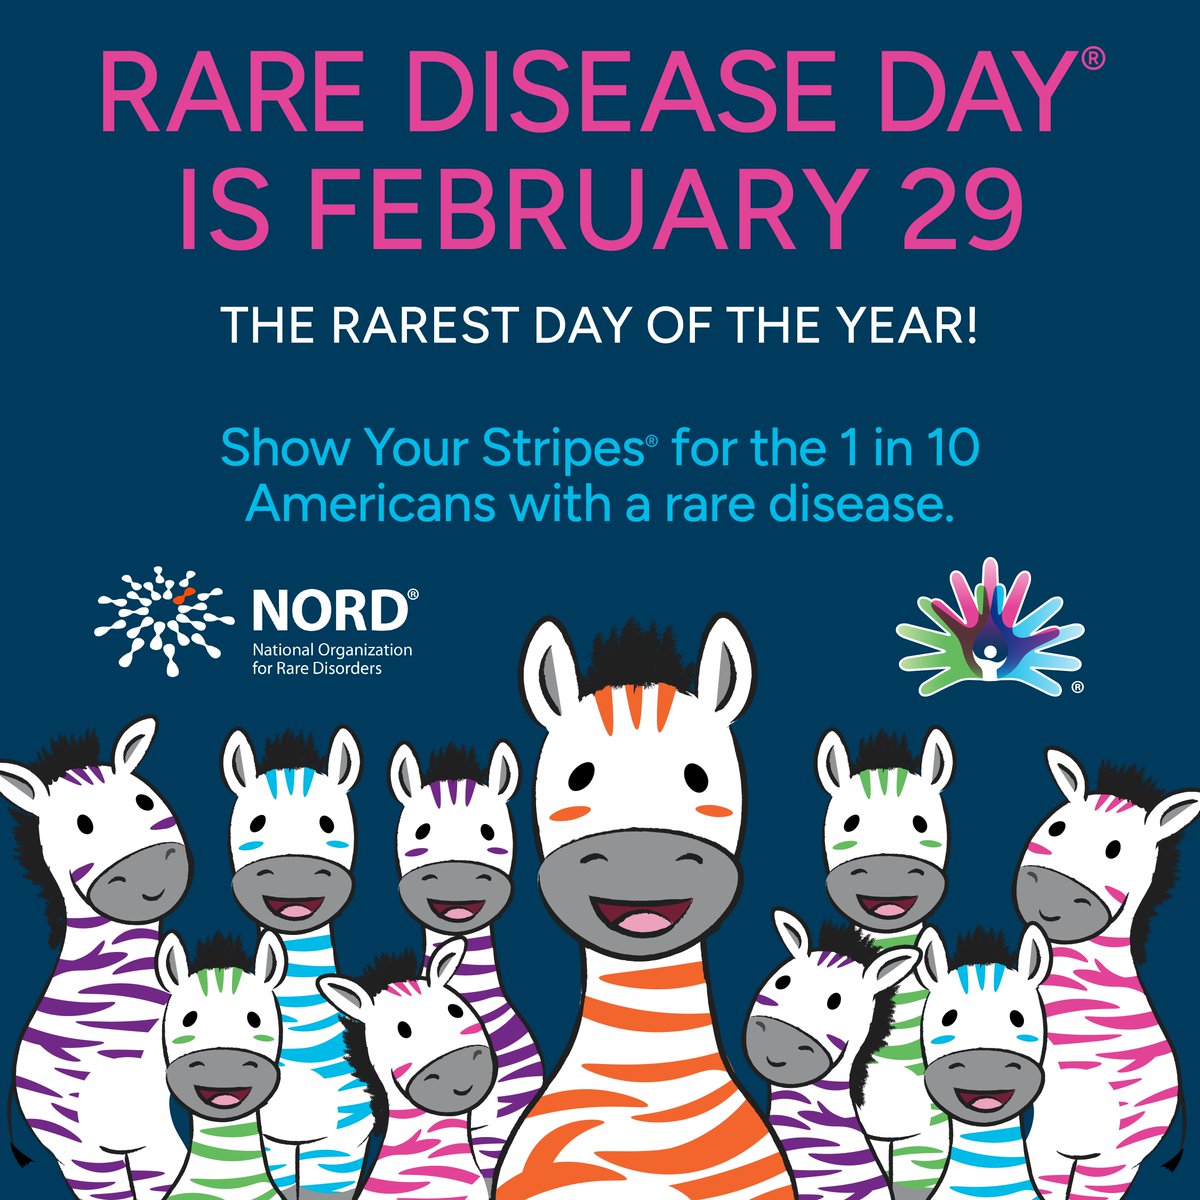 The zebra is the mascot for rare disease patients because, in medicine, zebras represent uncommon answers. One out of every 10 Americans has a rare disease. On February 29, #RareDiseaseDay, post a selfie with the hashtag #ShowYourStripes to share your rare story with others!